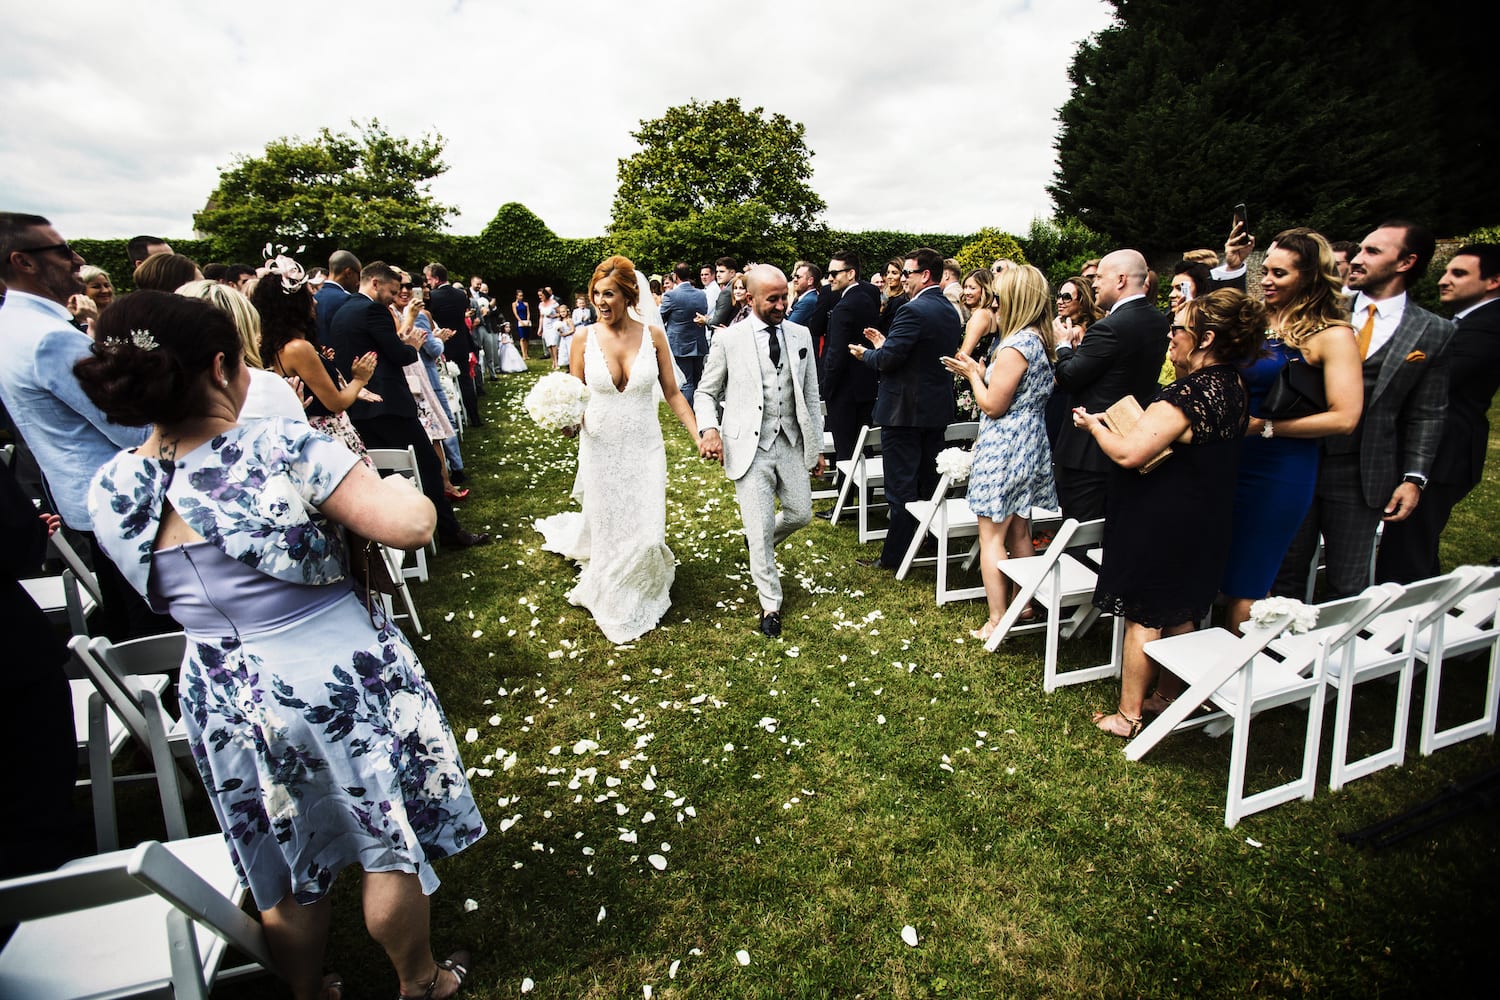 Sophie and Simon’s wedding at Notley Abbey